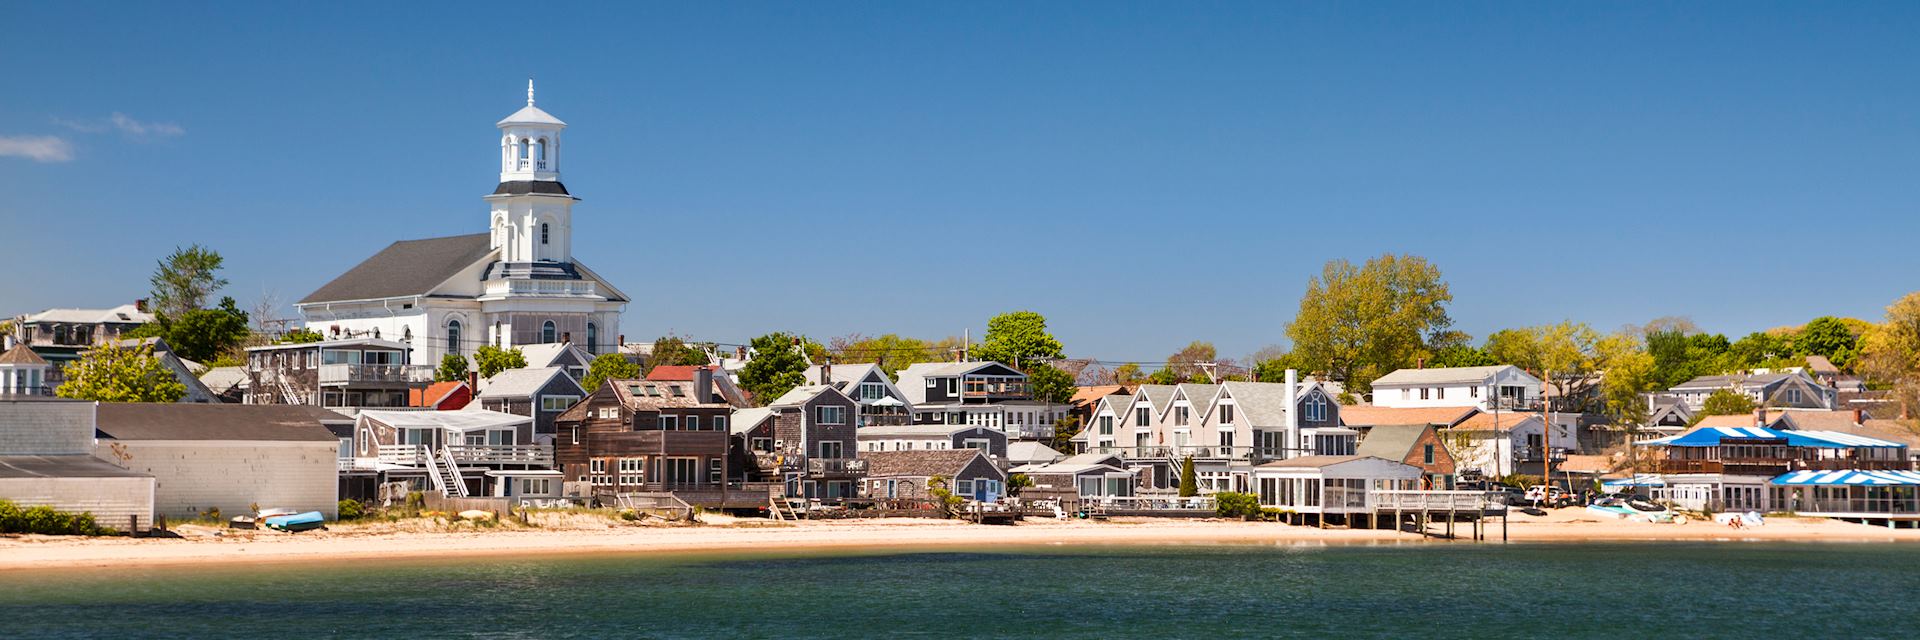 Provincetown waterfront